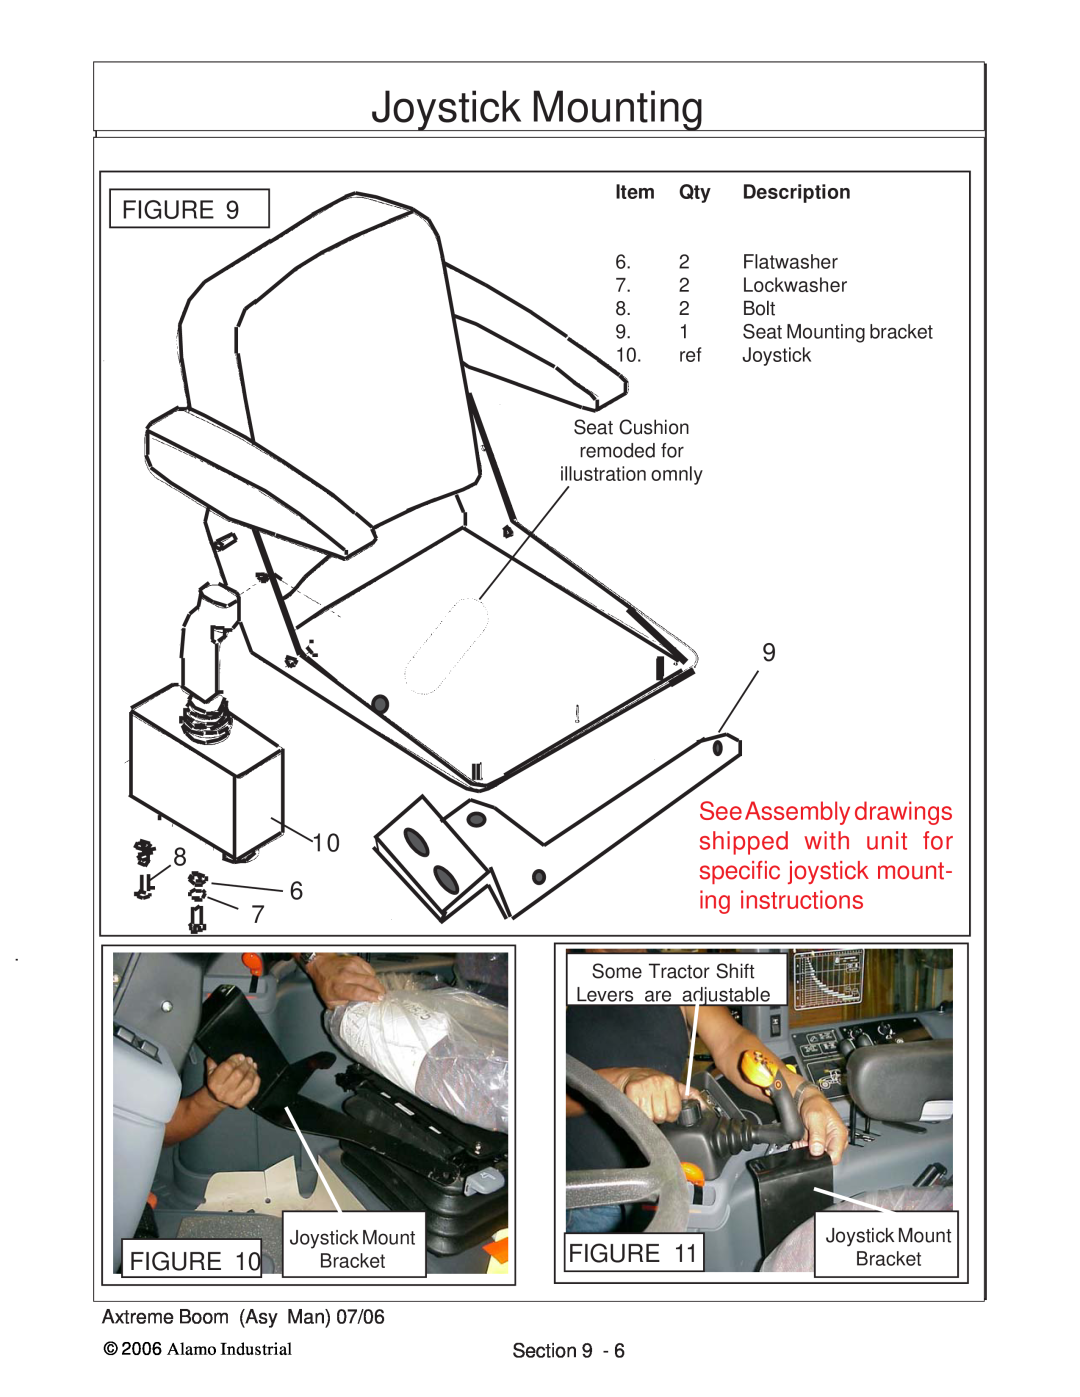 Alamo 02984405 Joystick Mounting, ing instructions, SeeAssembly drawings shipped with unit for specific joystick mount 